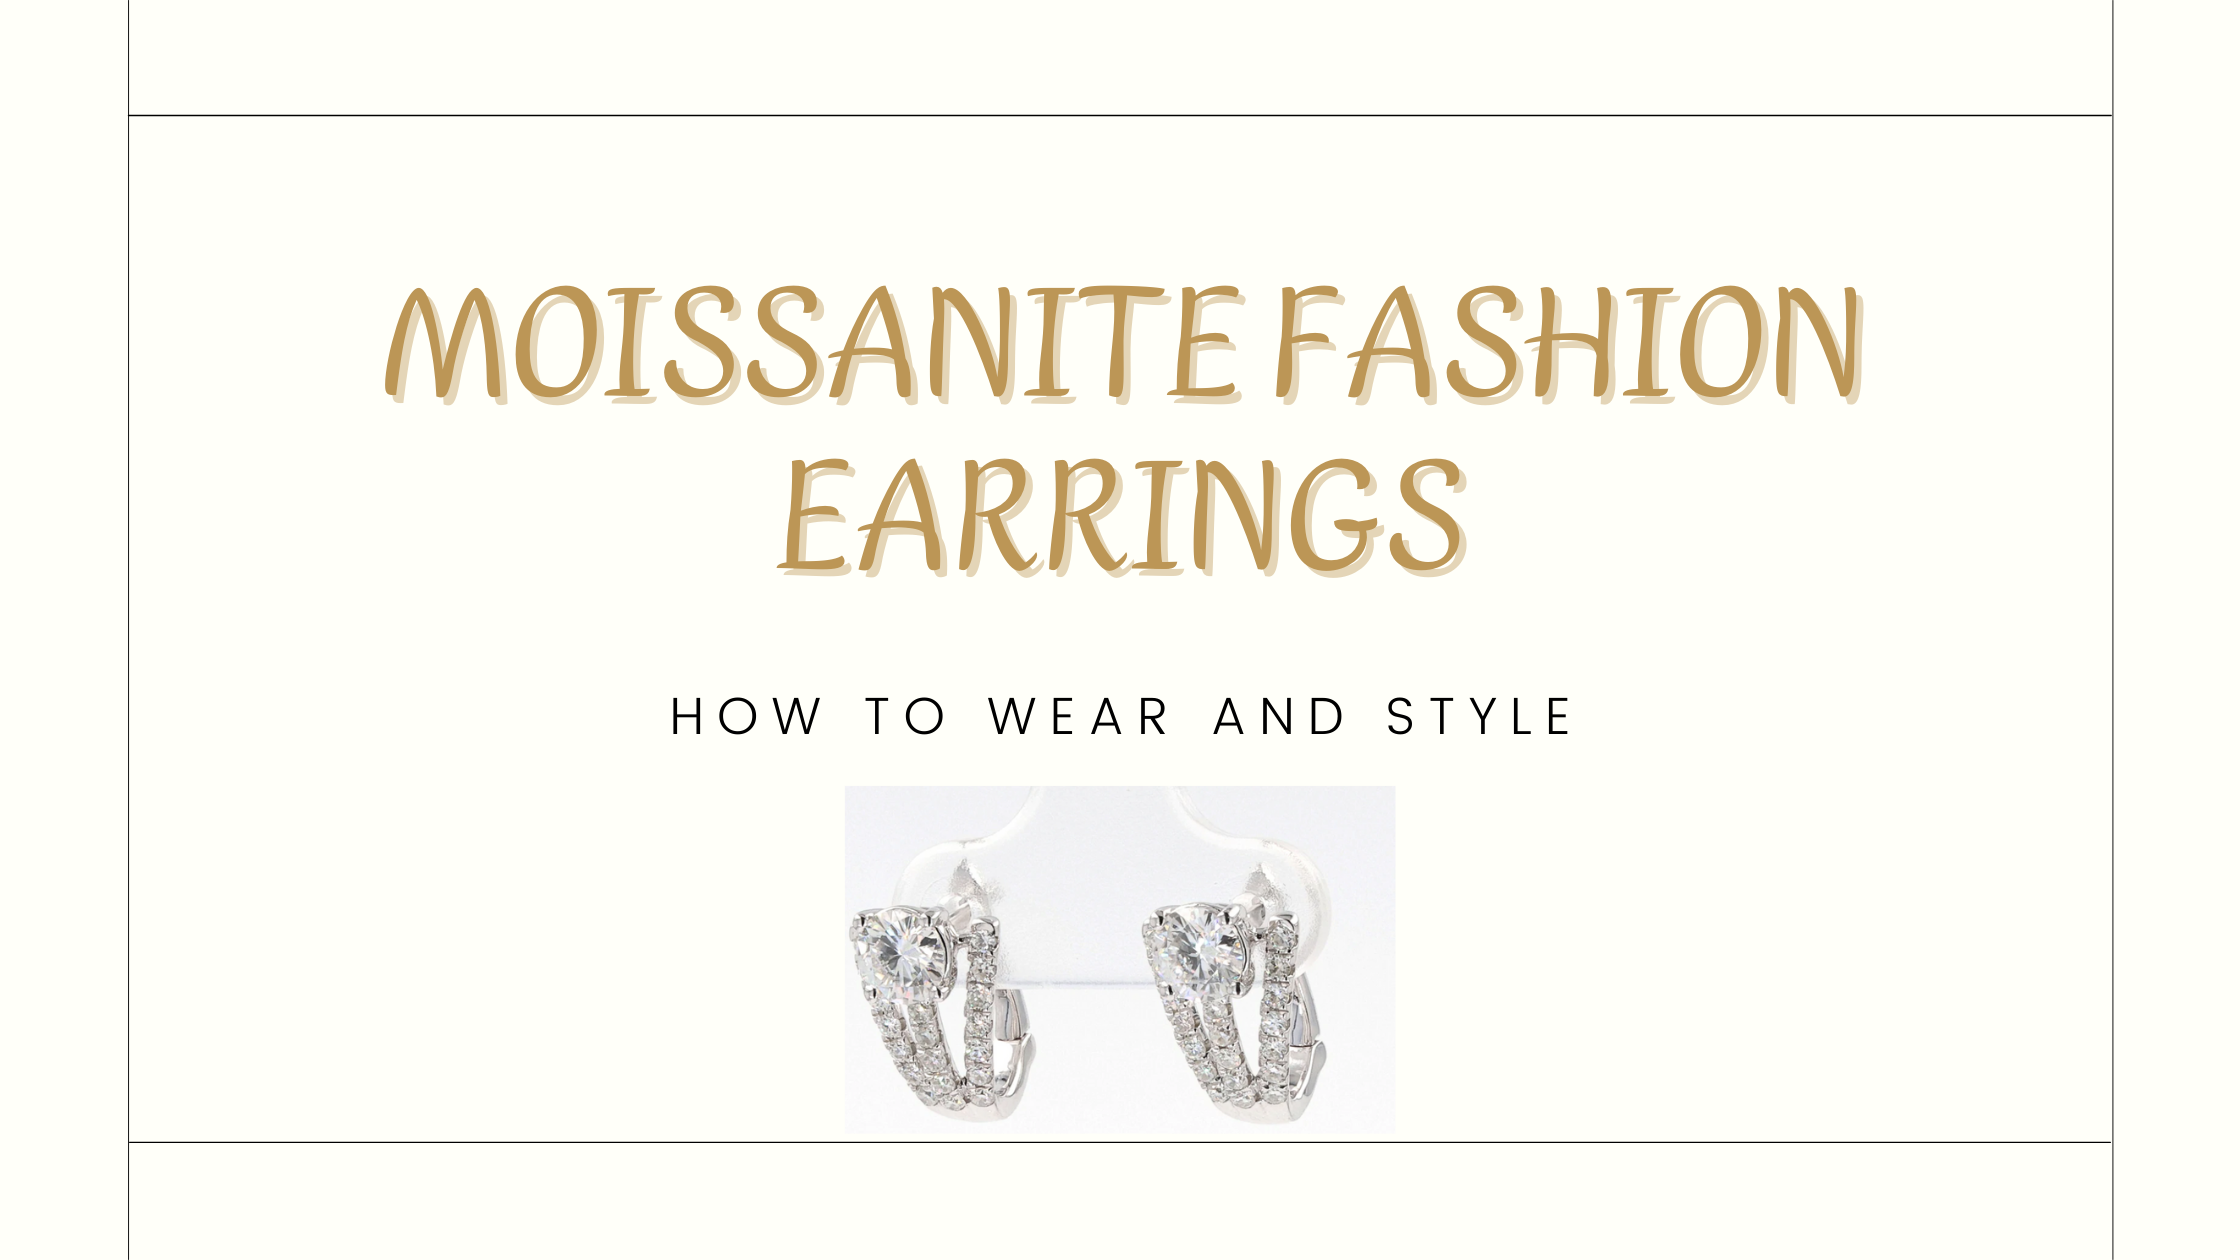 How to Wear and Style Moissanite Fashion Earrings